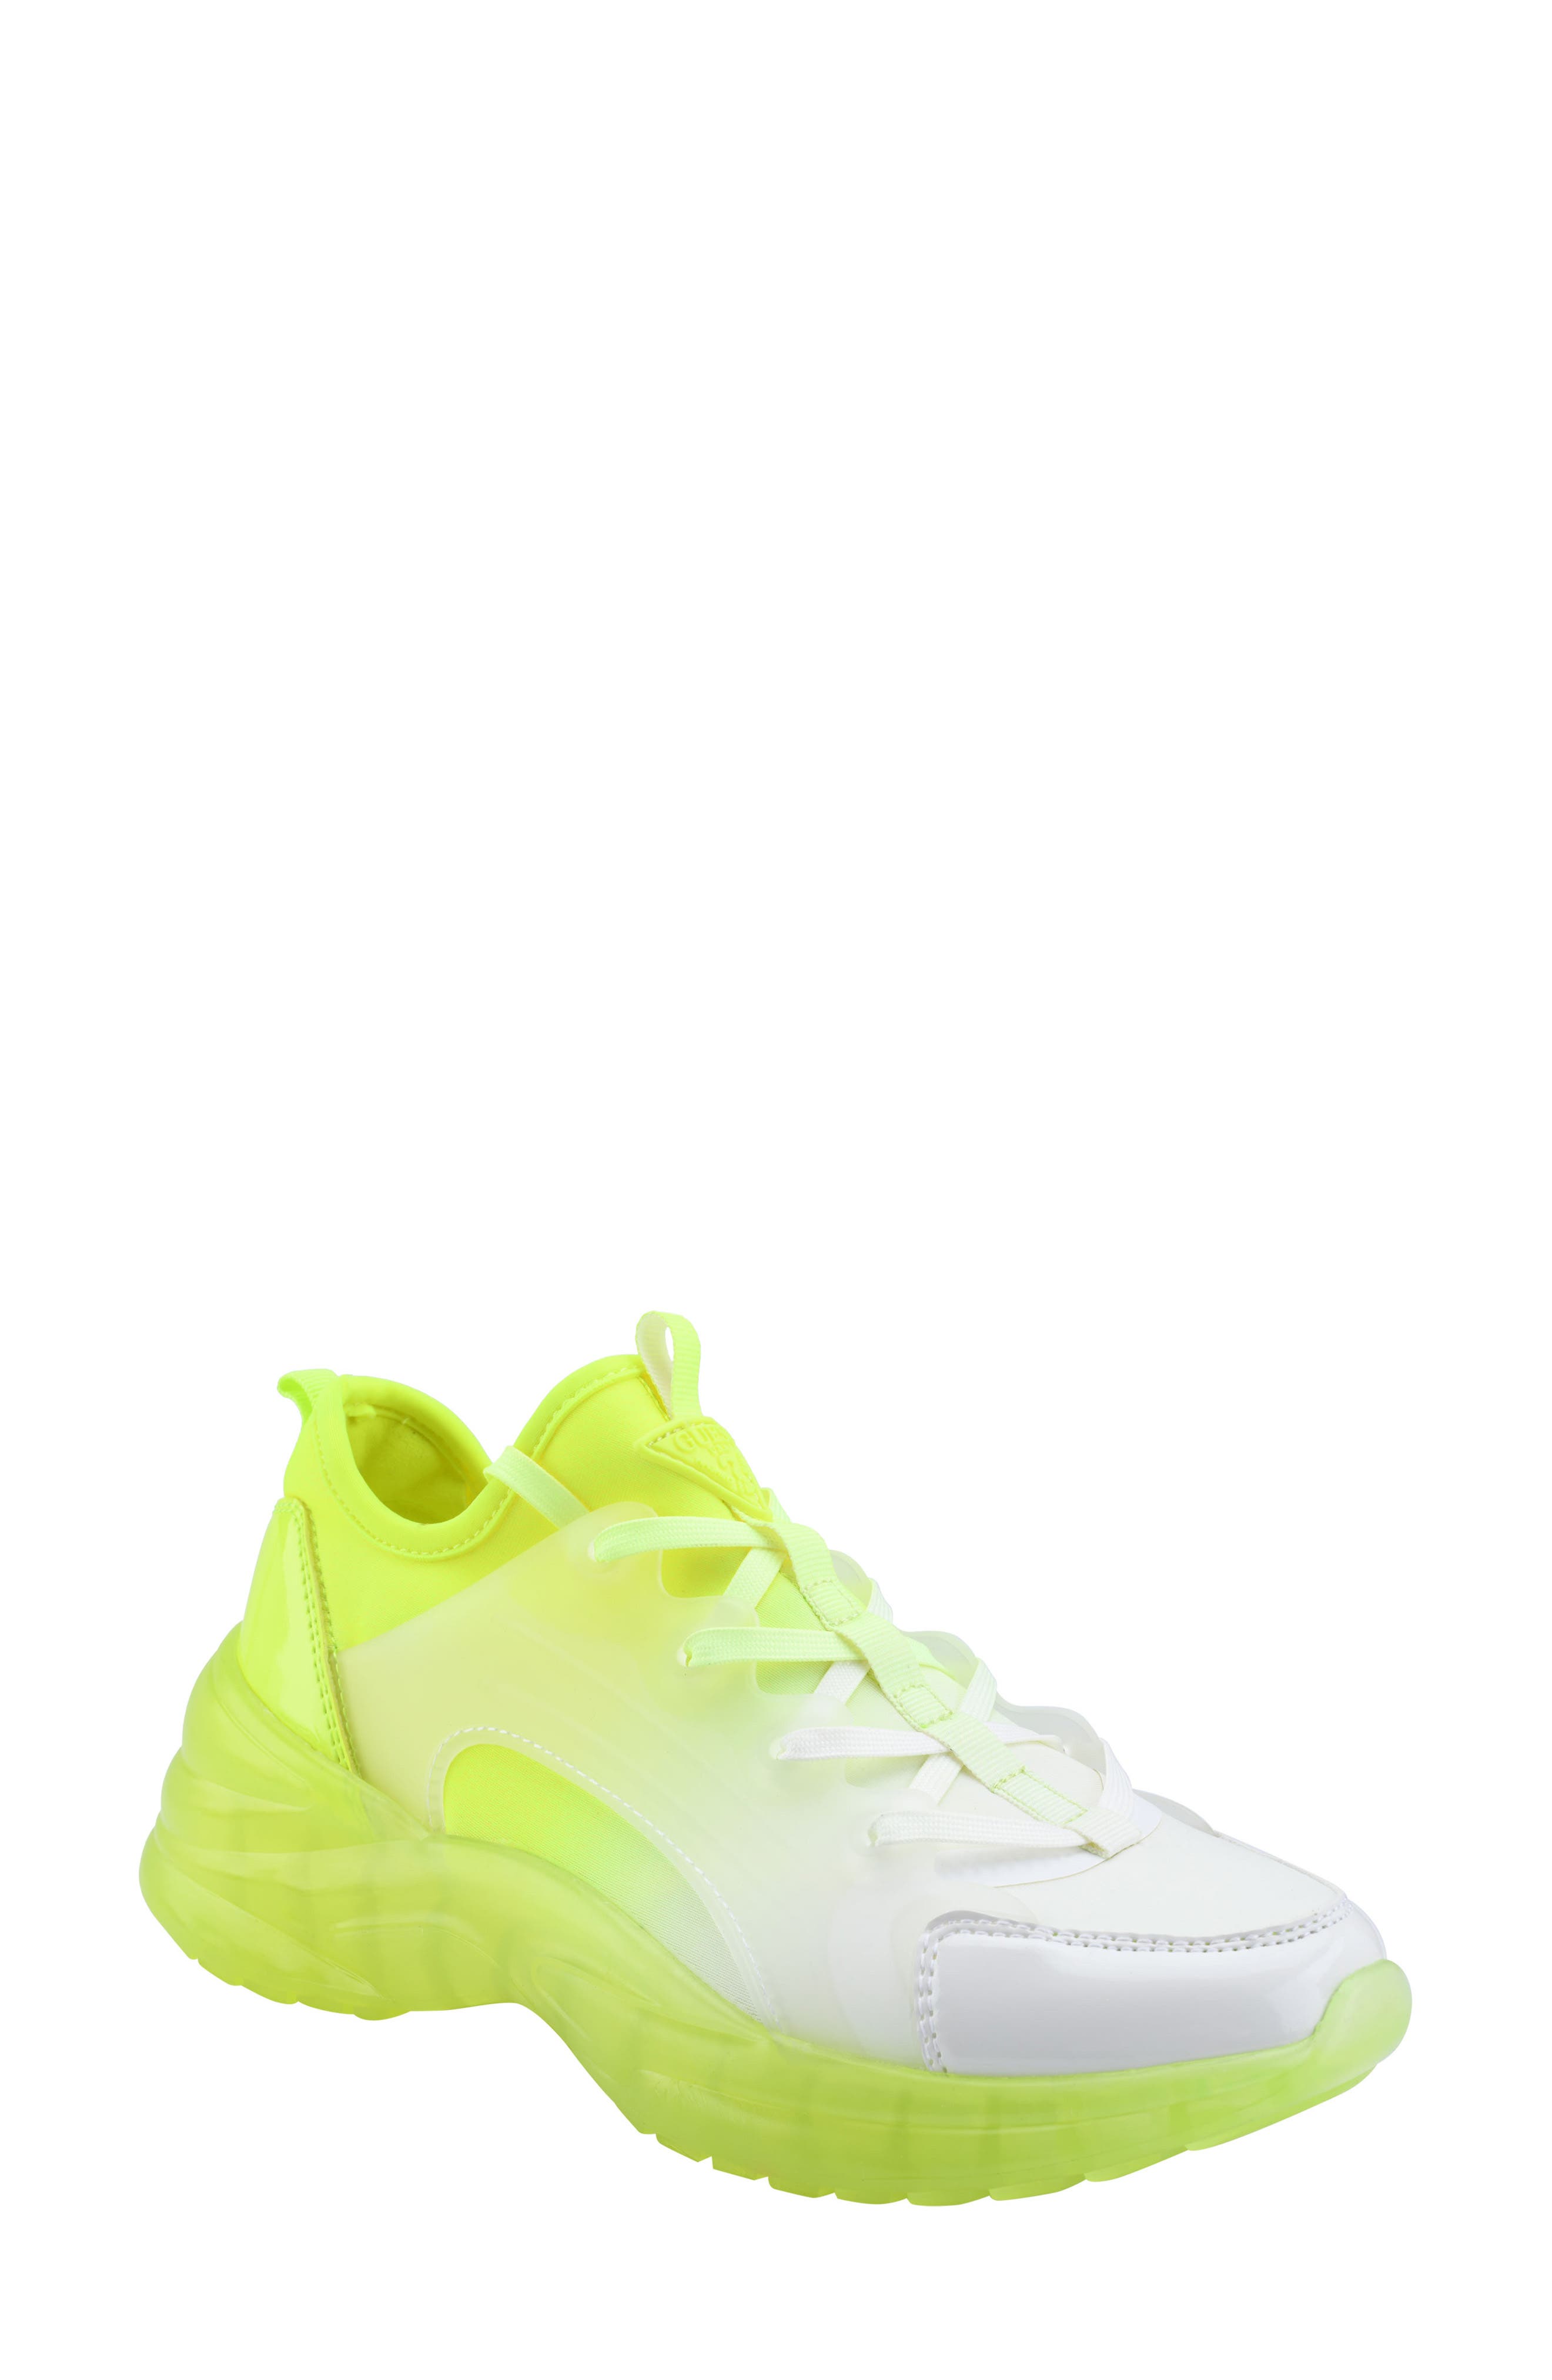 neon yellow shoes for women